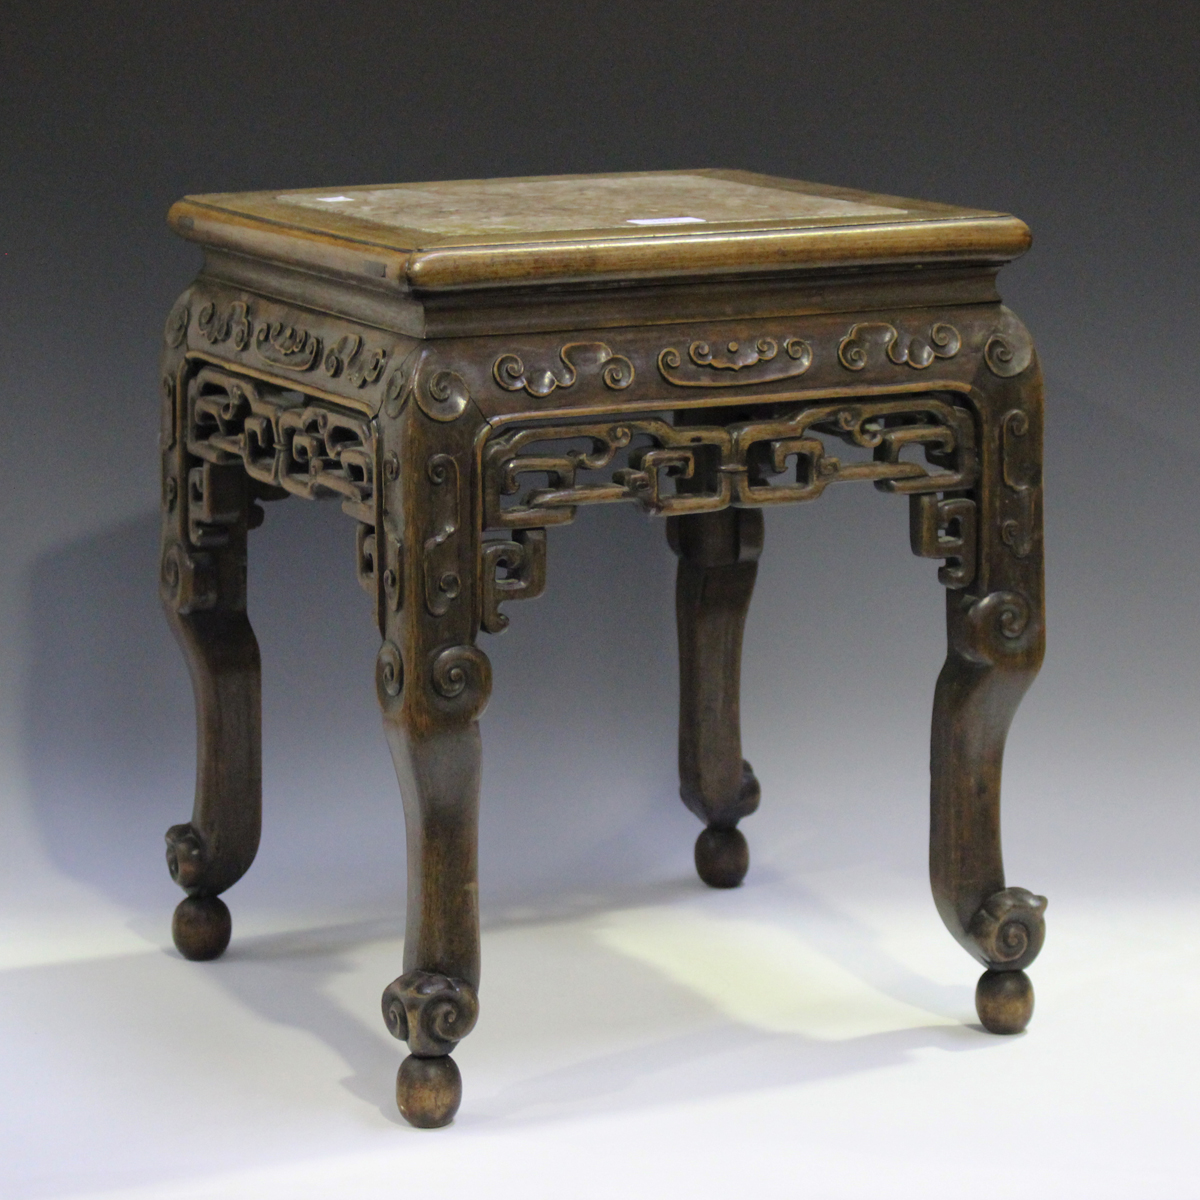 A Chinese hardwood jardinière stand, late 19th century, the square top inset with a rouge marble